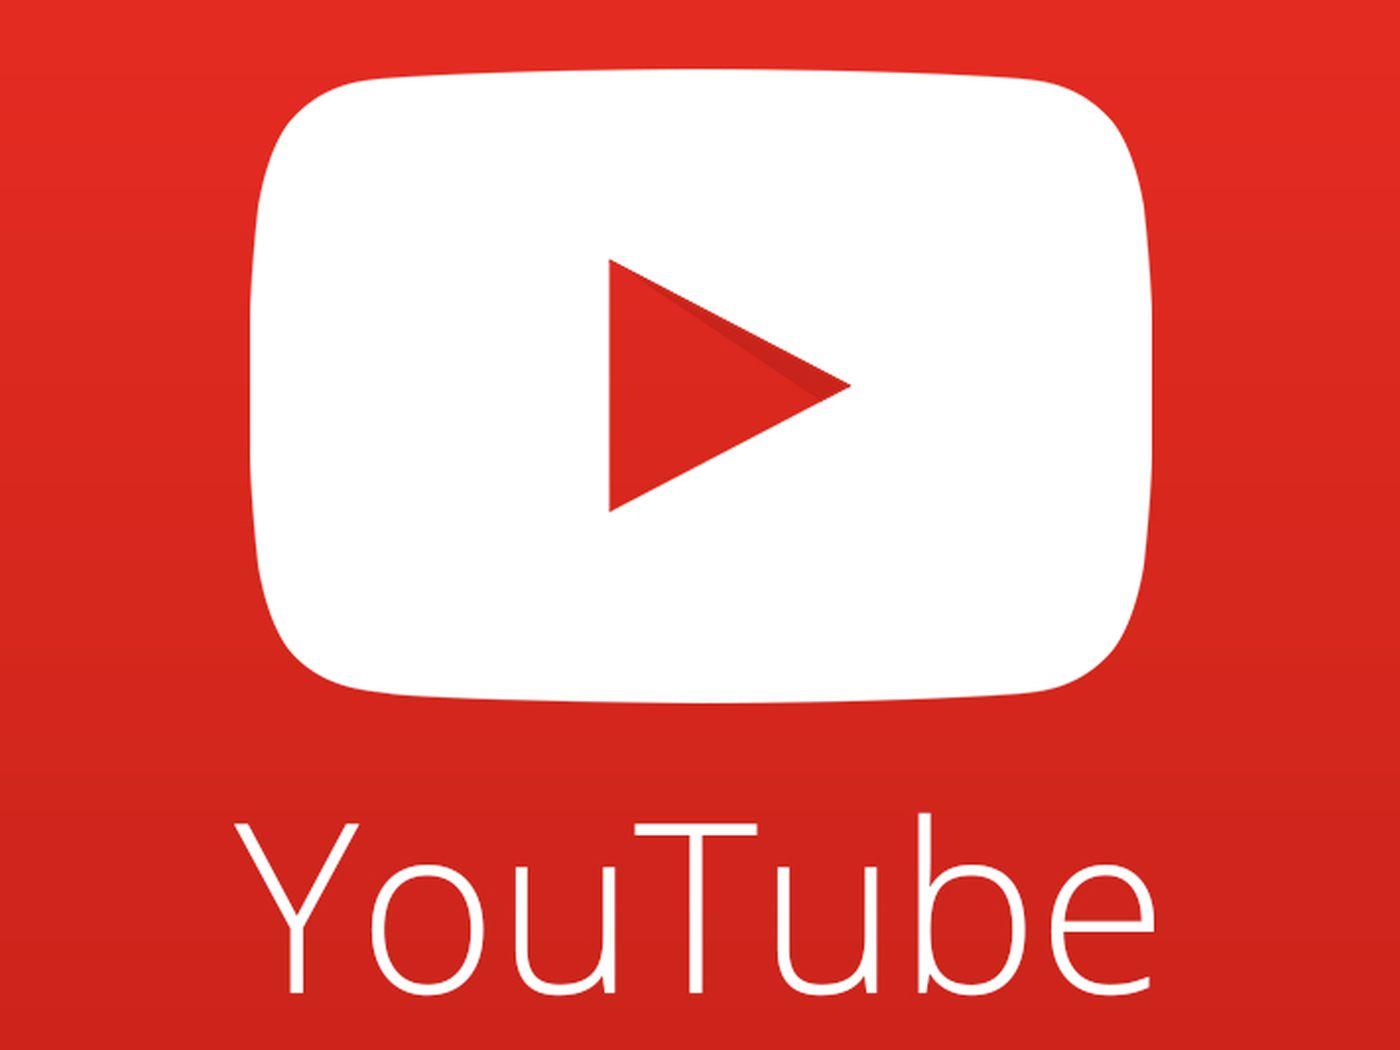 Red YouTube Logo - YouTube teases new logo on Facebook and Twitter - The Verge